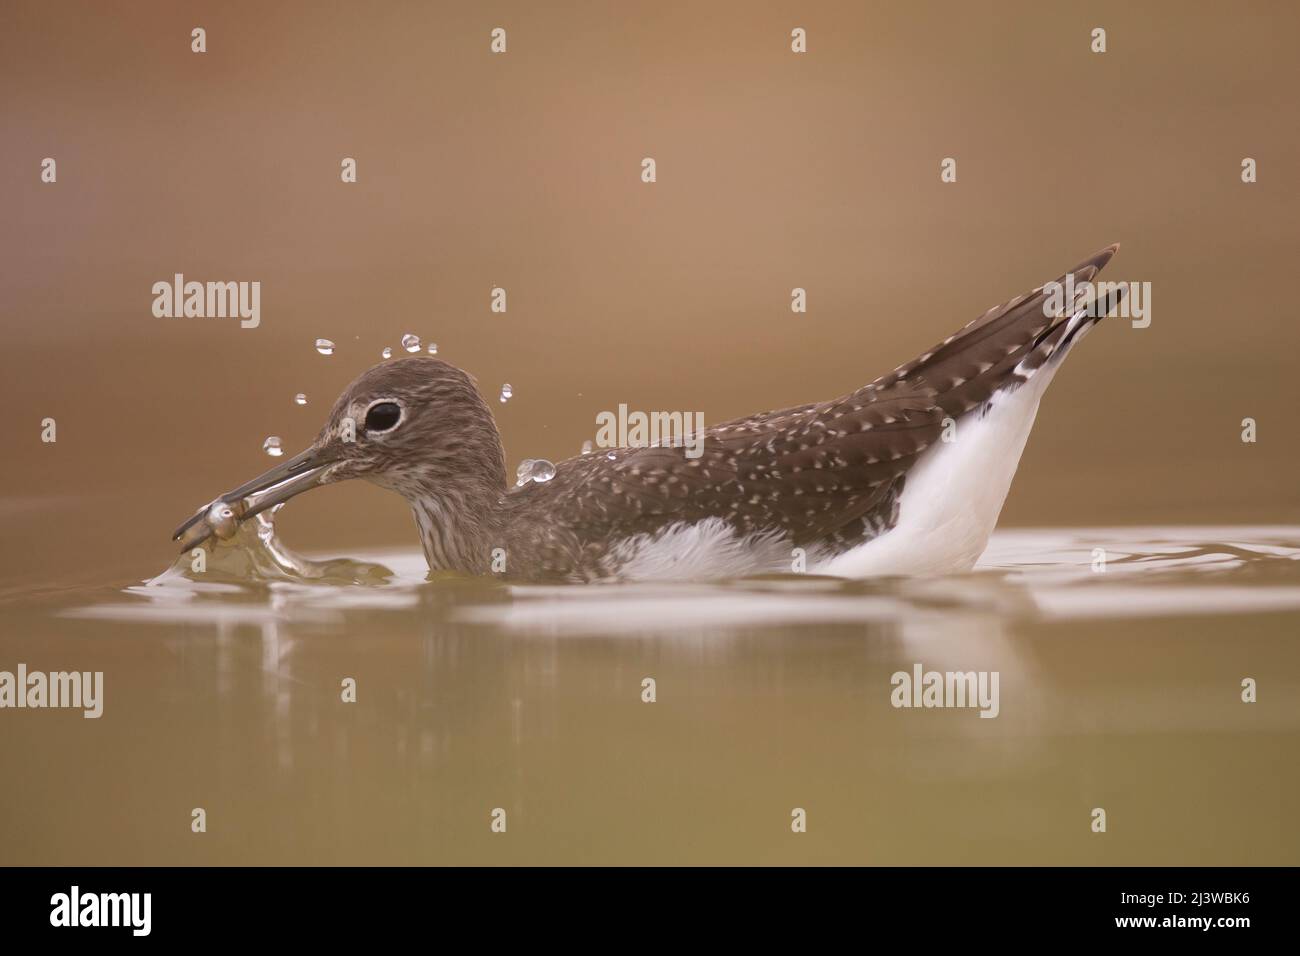 Common sandpiper (Actitis hypoleucos). fishing in water This is a wading bird that inhabits coastal areas. It is a migrant, spending the northern summ Stock Photo